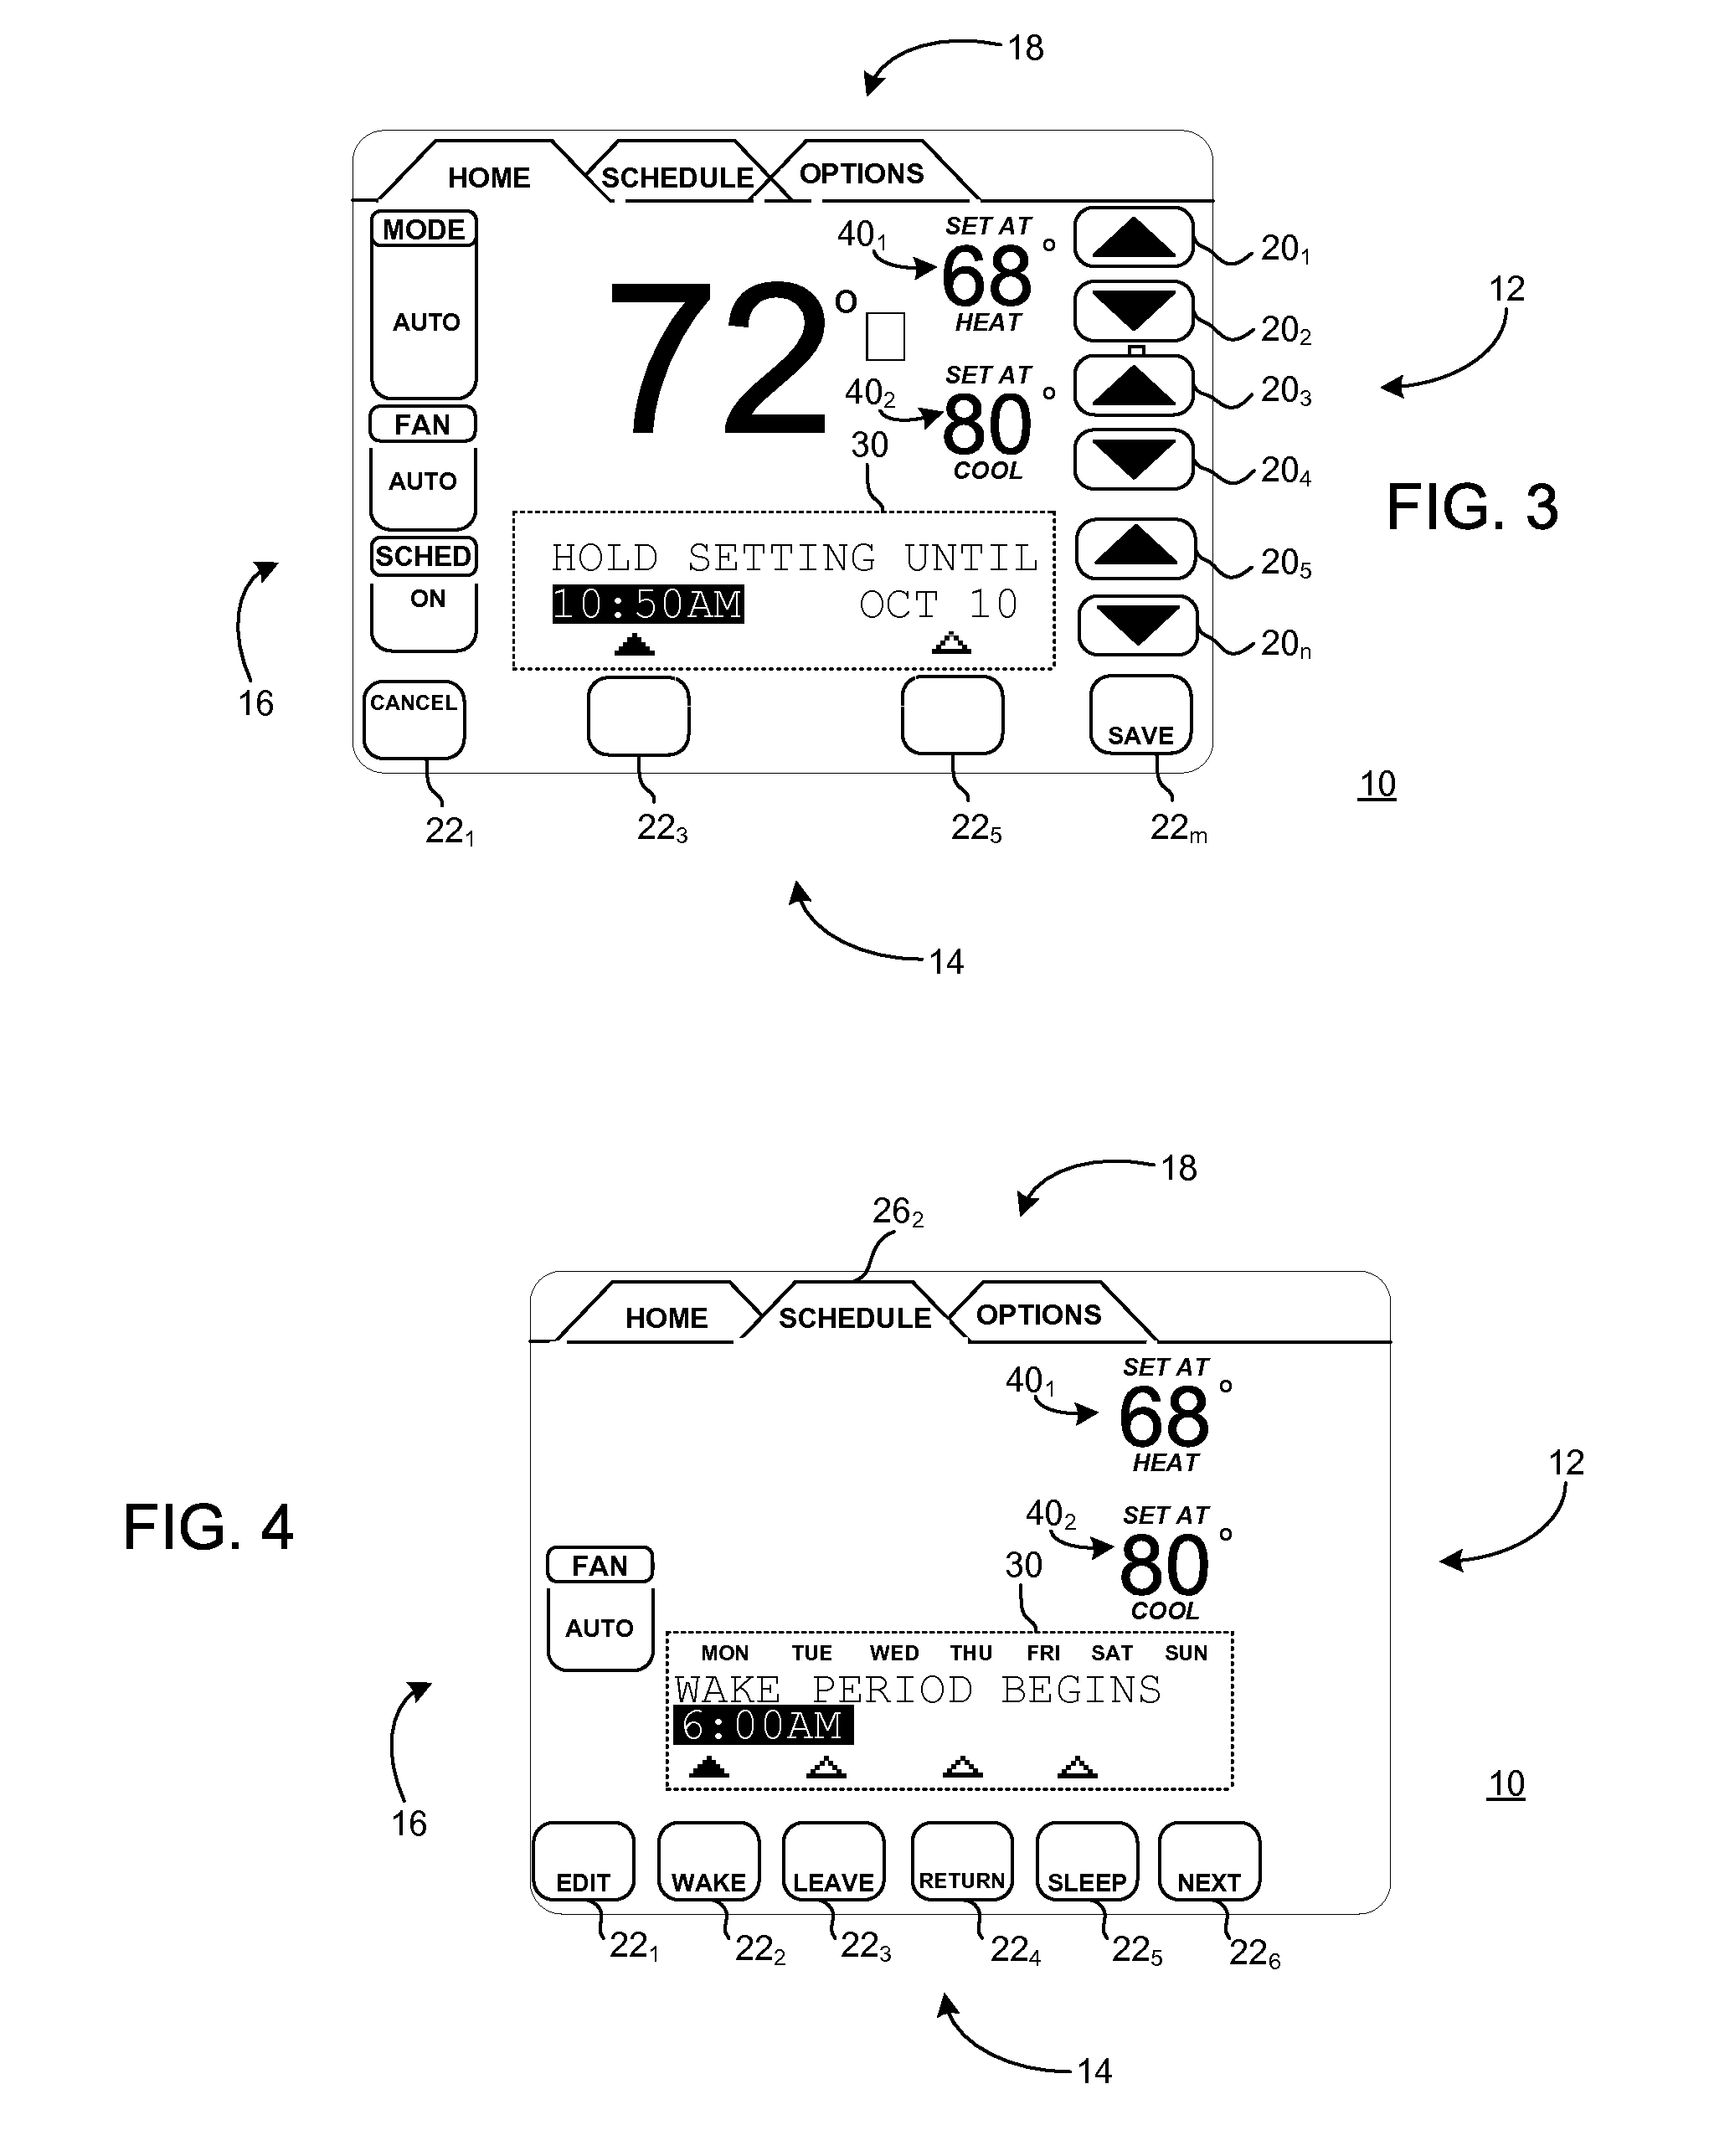 Display apparatus and method for entering a reminder in a control unit for an environmental control system